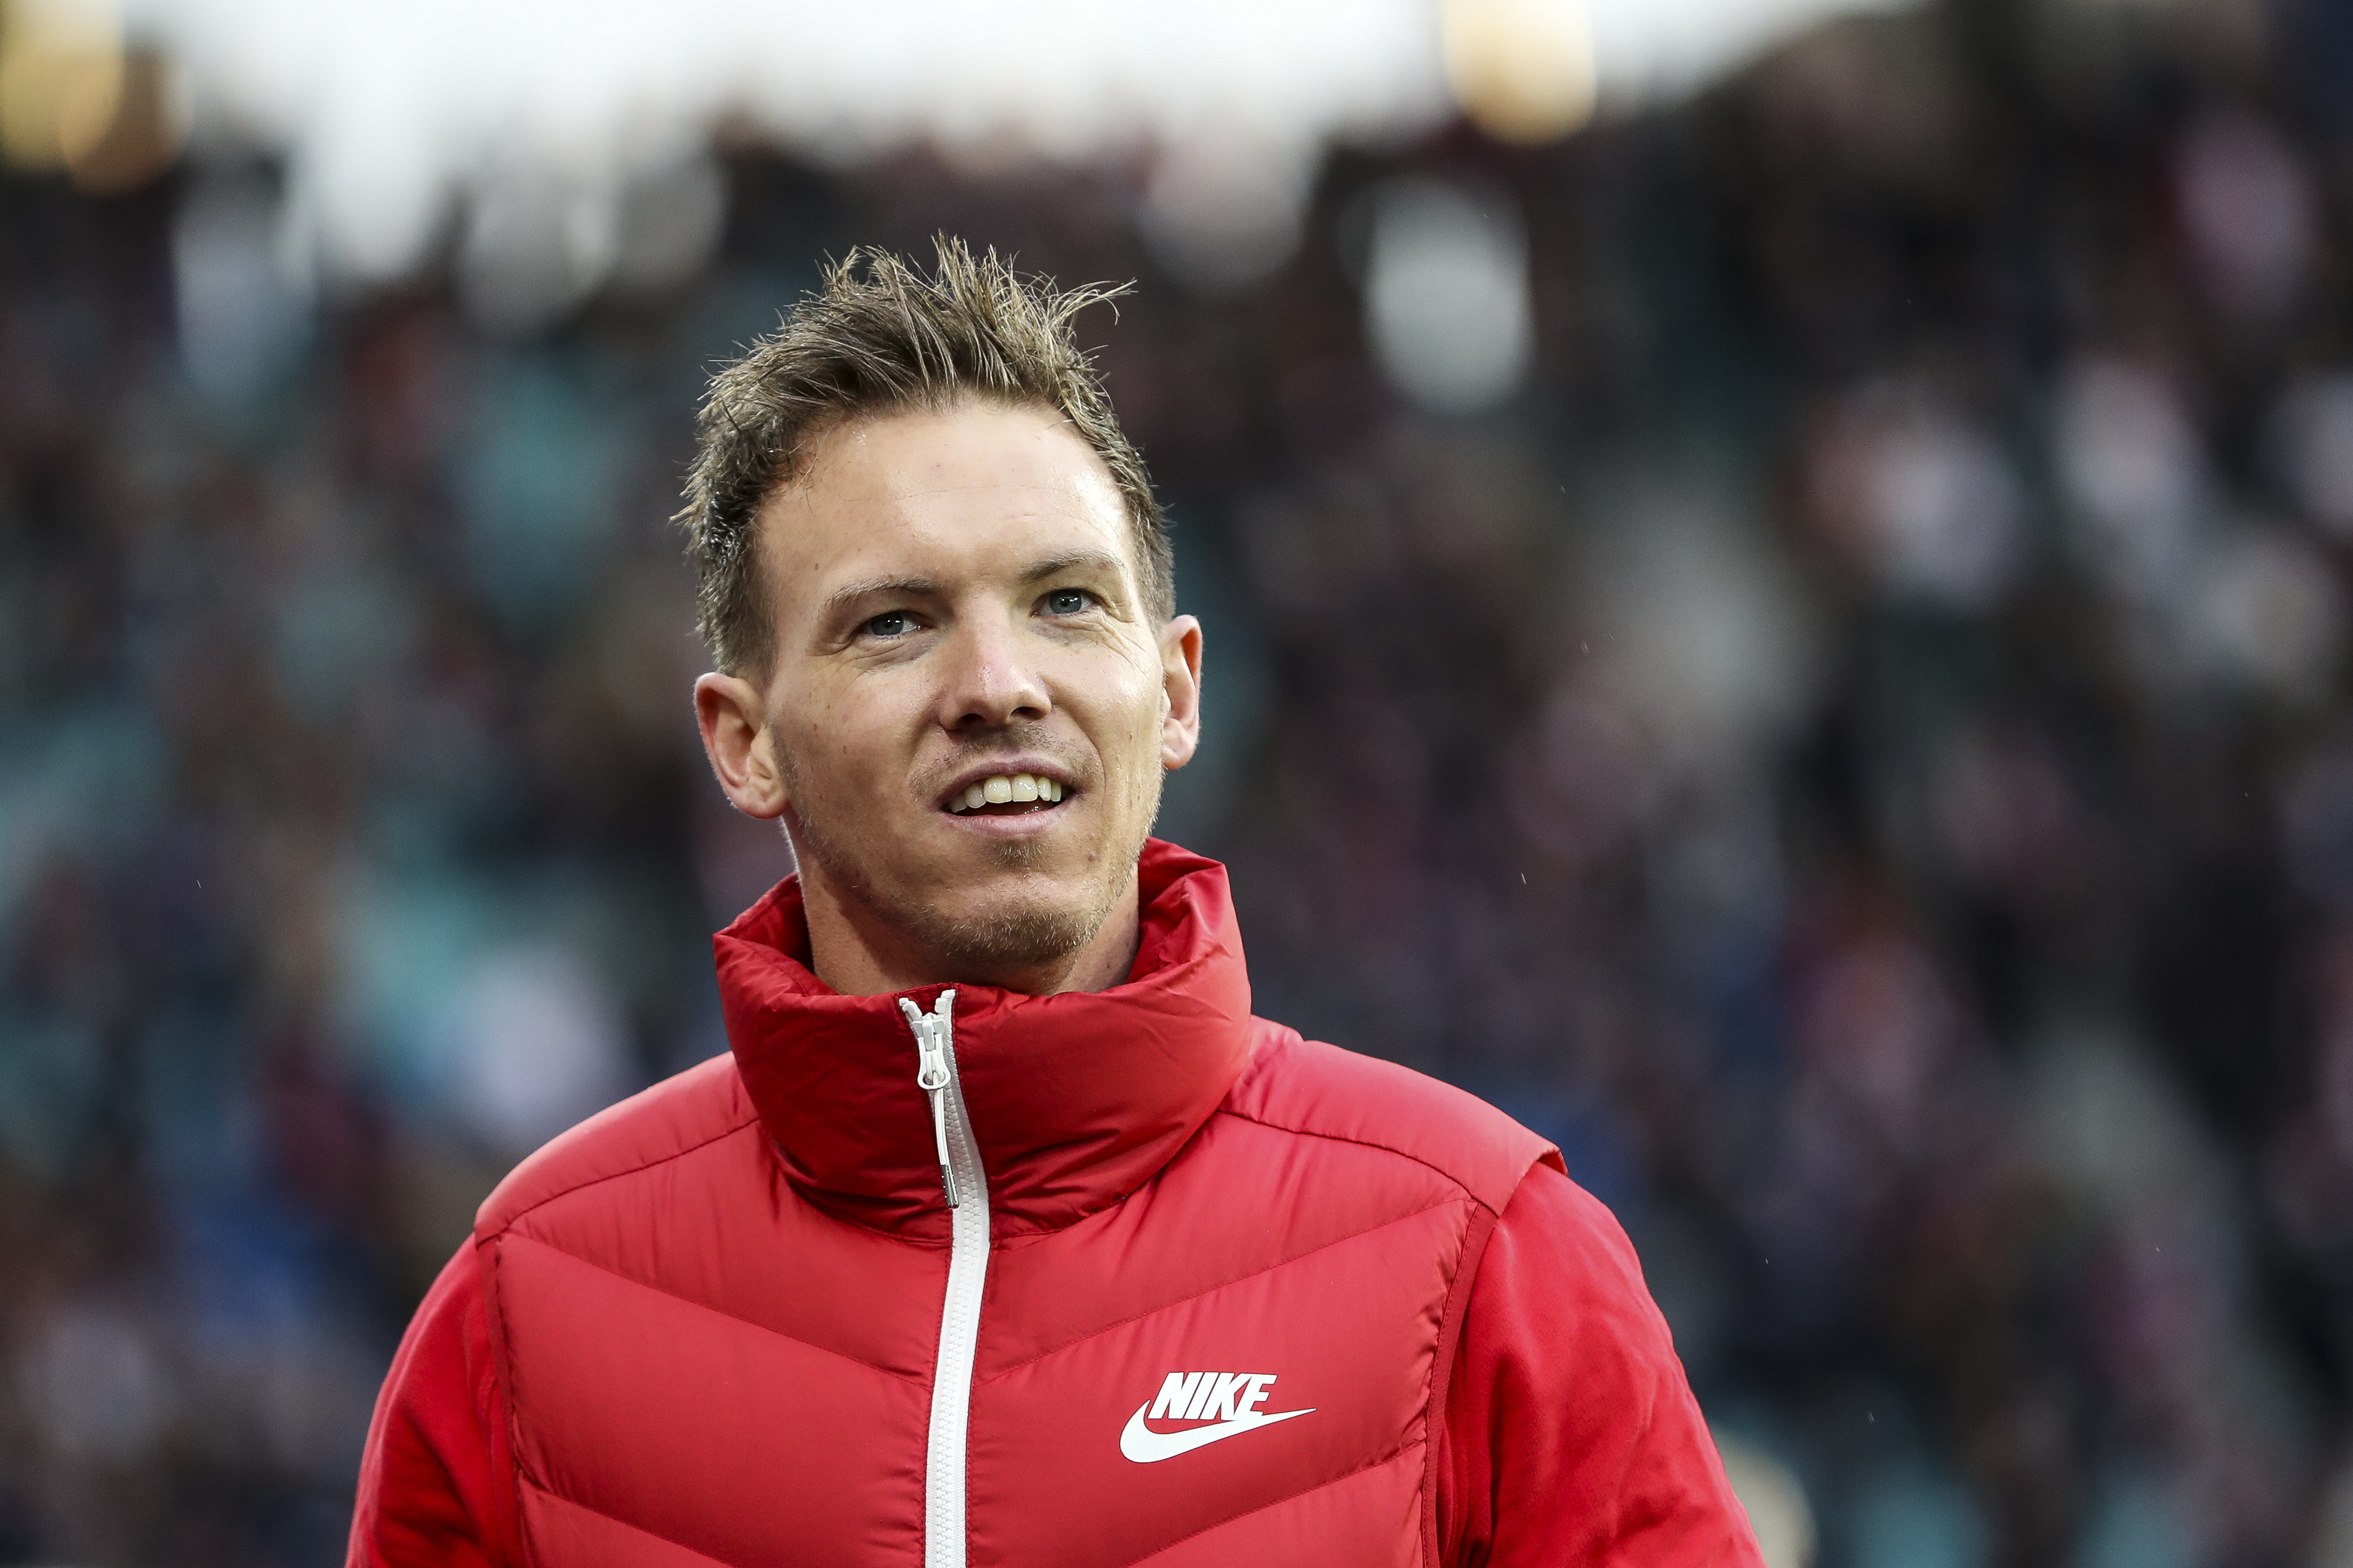 Julian Nagelsmann is regarded as one of the brightest young managers in Europe (Photo by Maja Hitij/Bongarts/Getty Images)